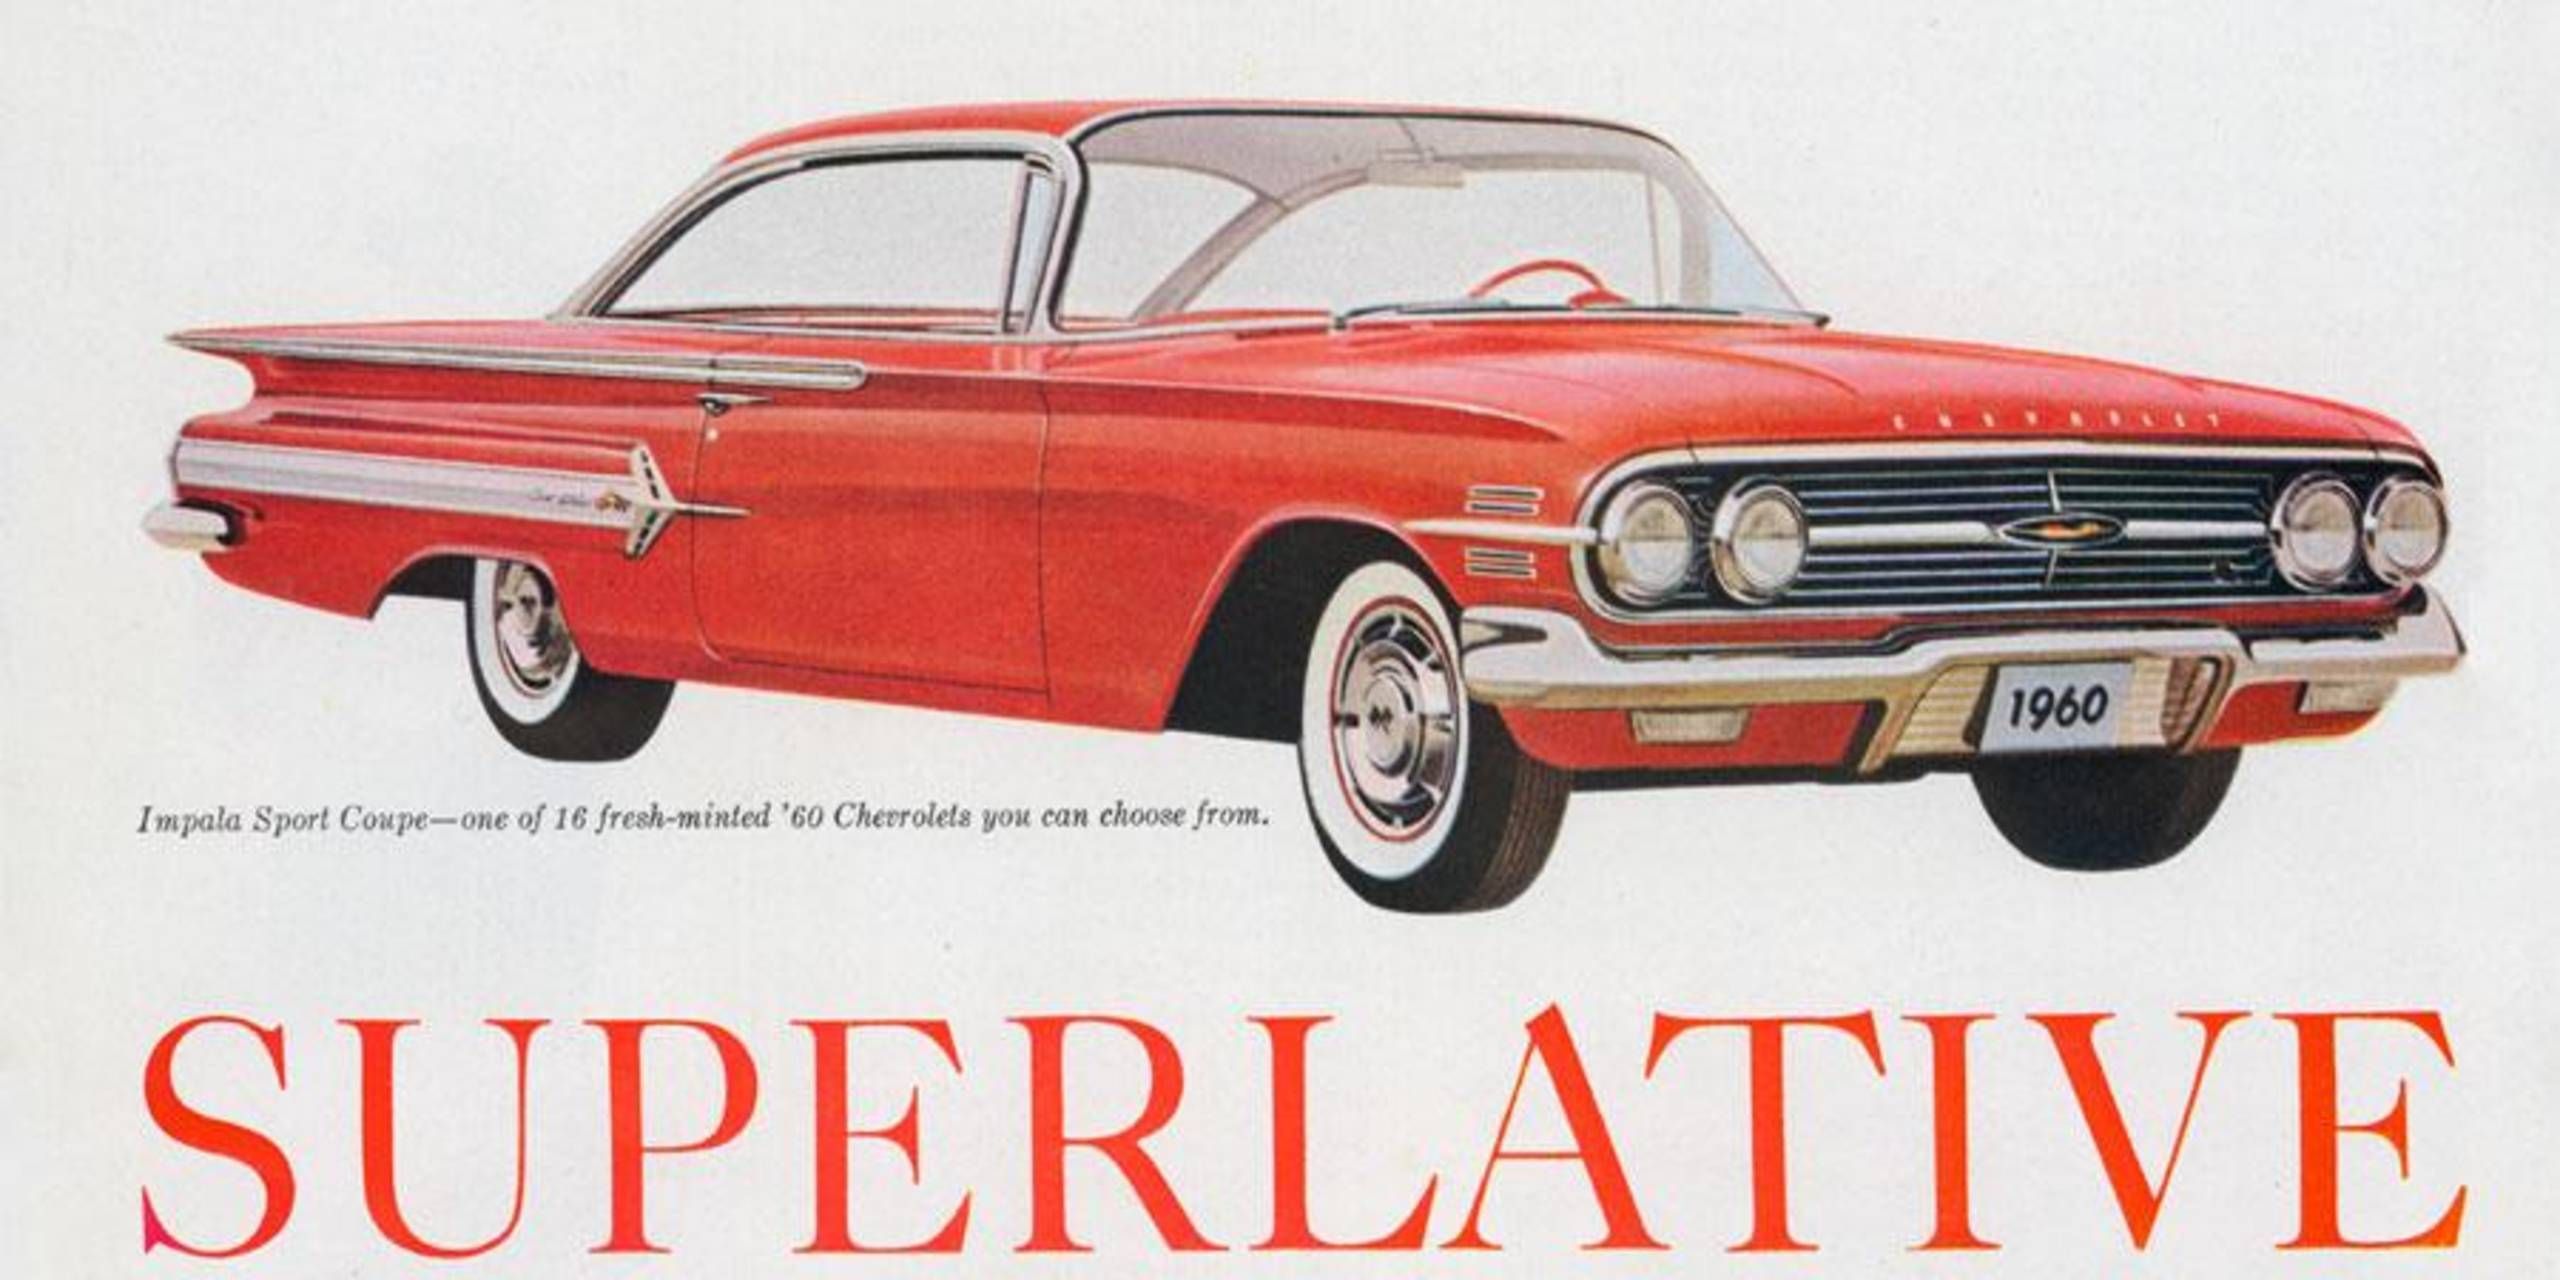 1960 Chevrolet Advertisement Goes Red, White and Blue